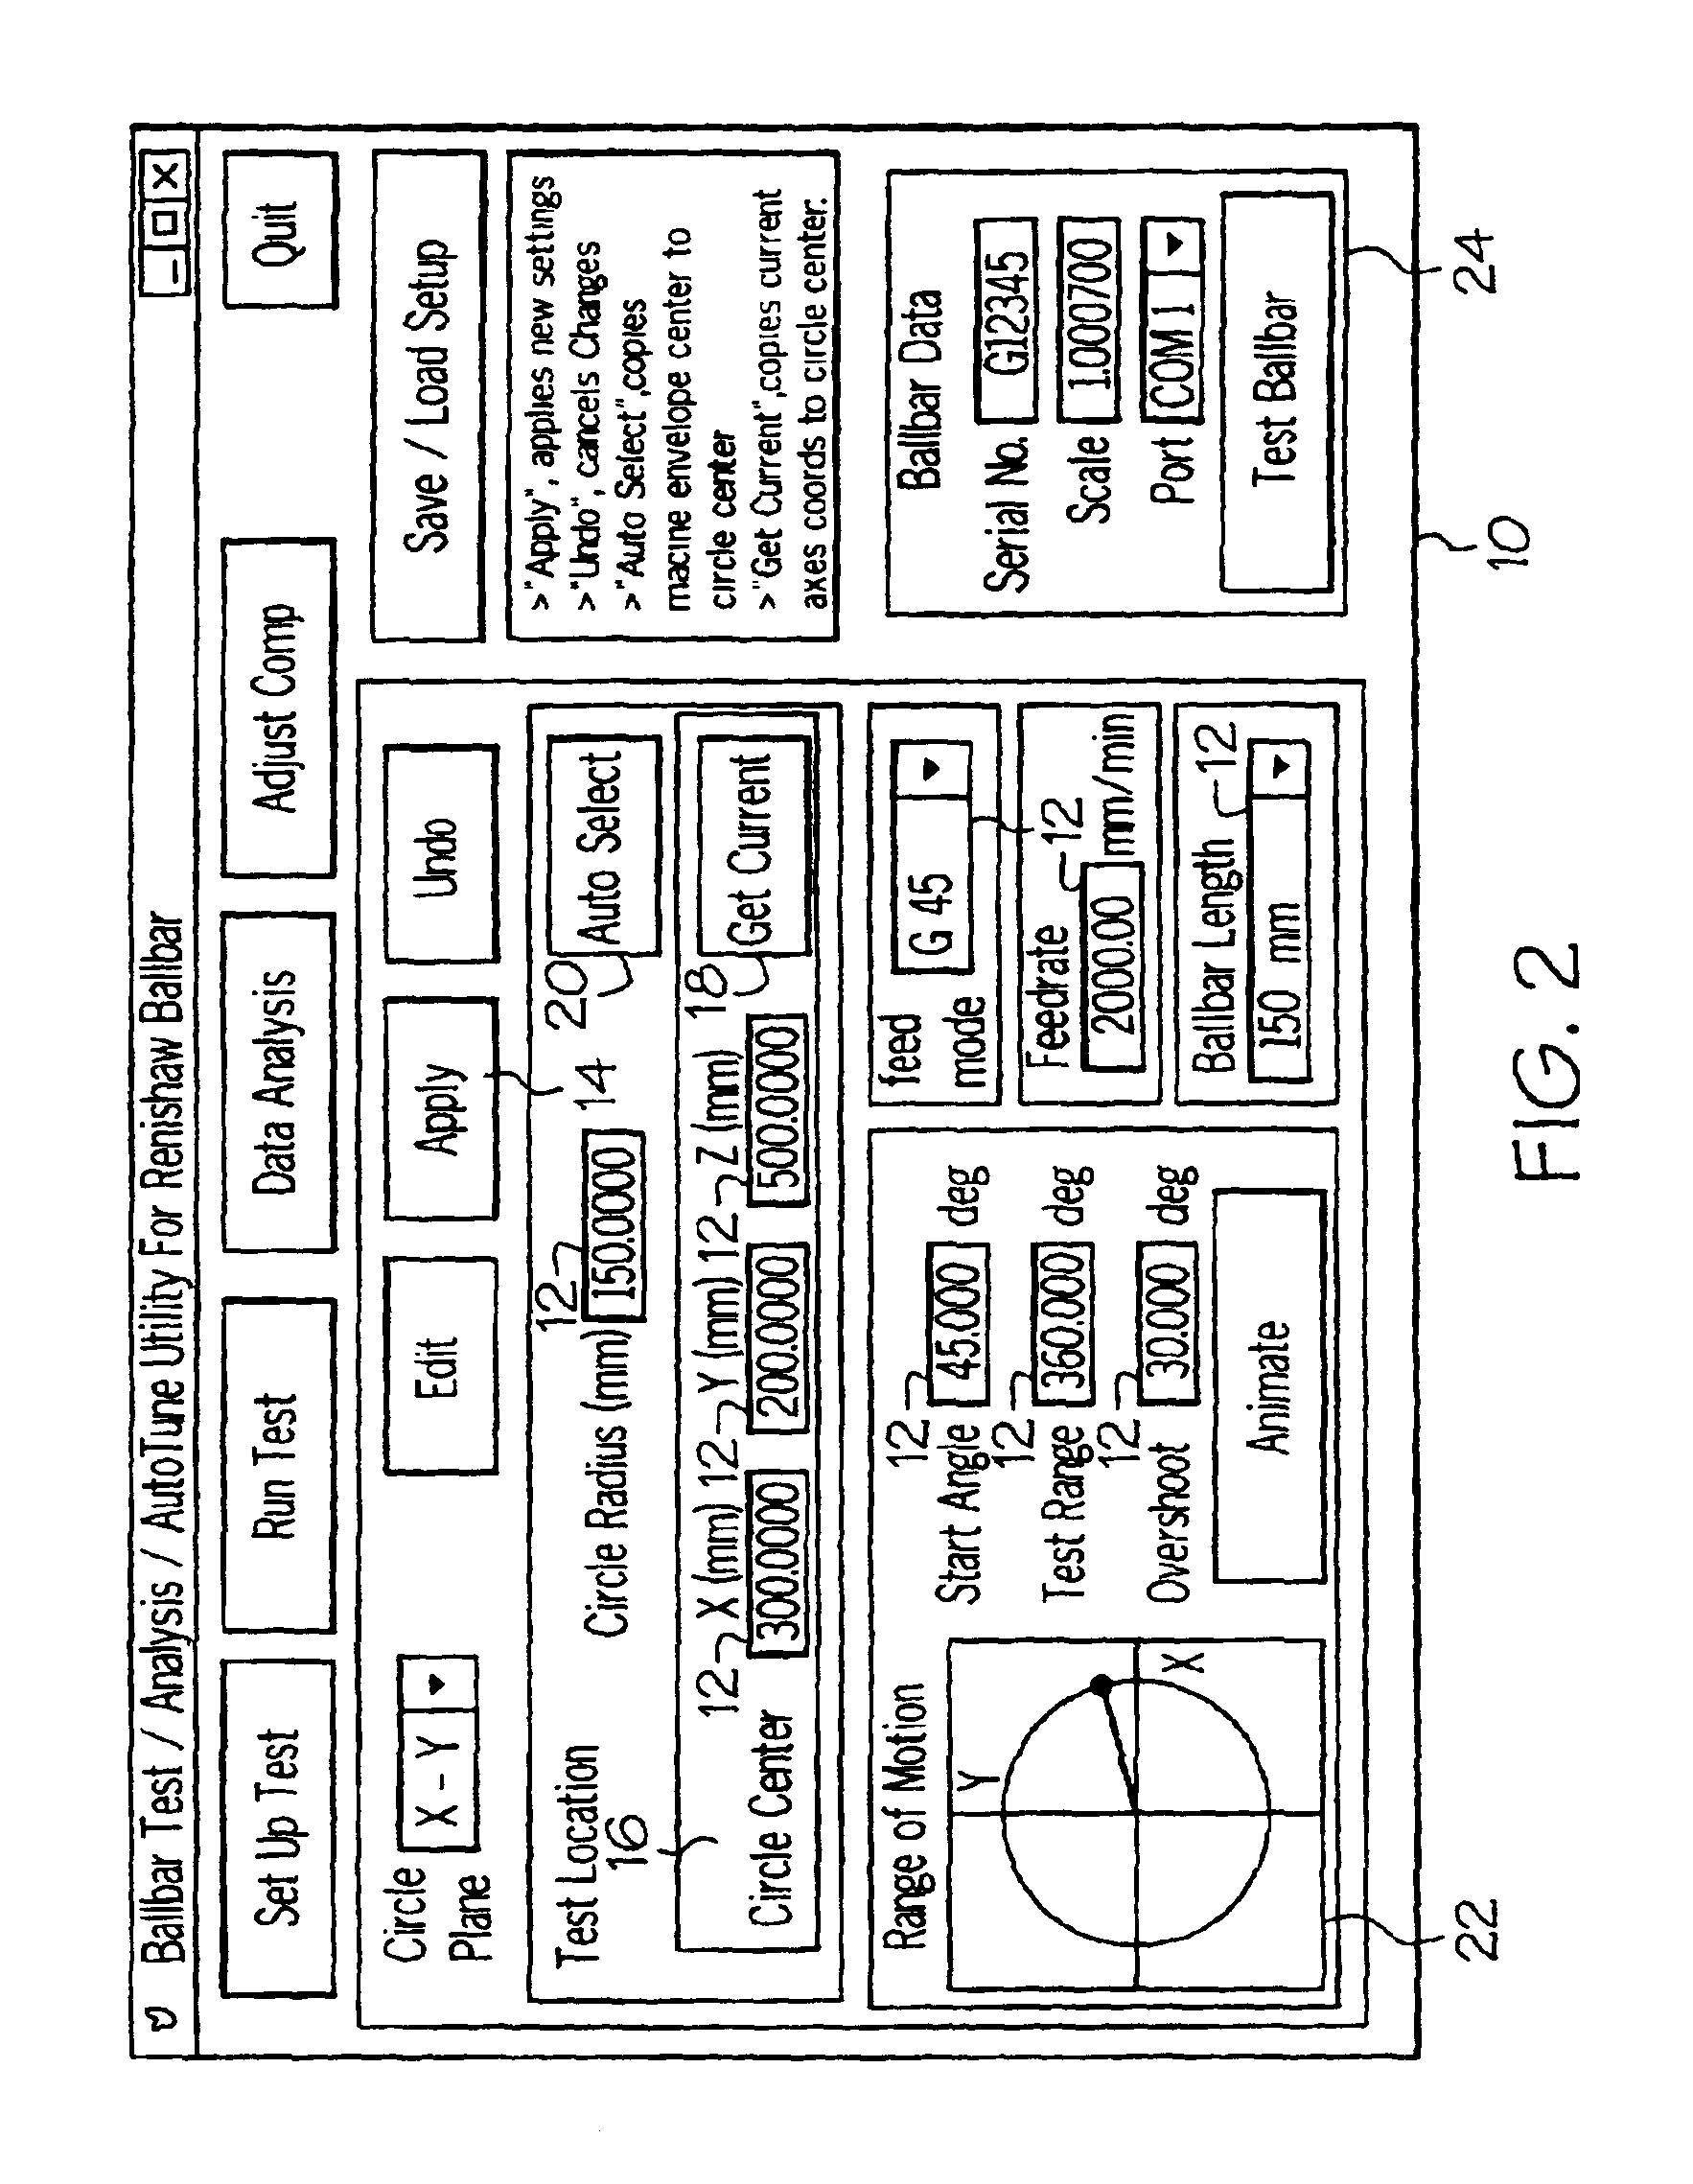 Method and apparatus for determining calibration options in a motion control system